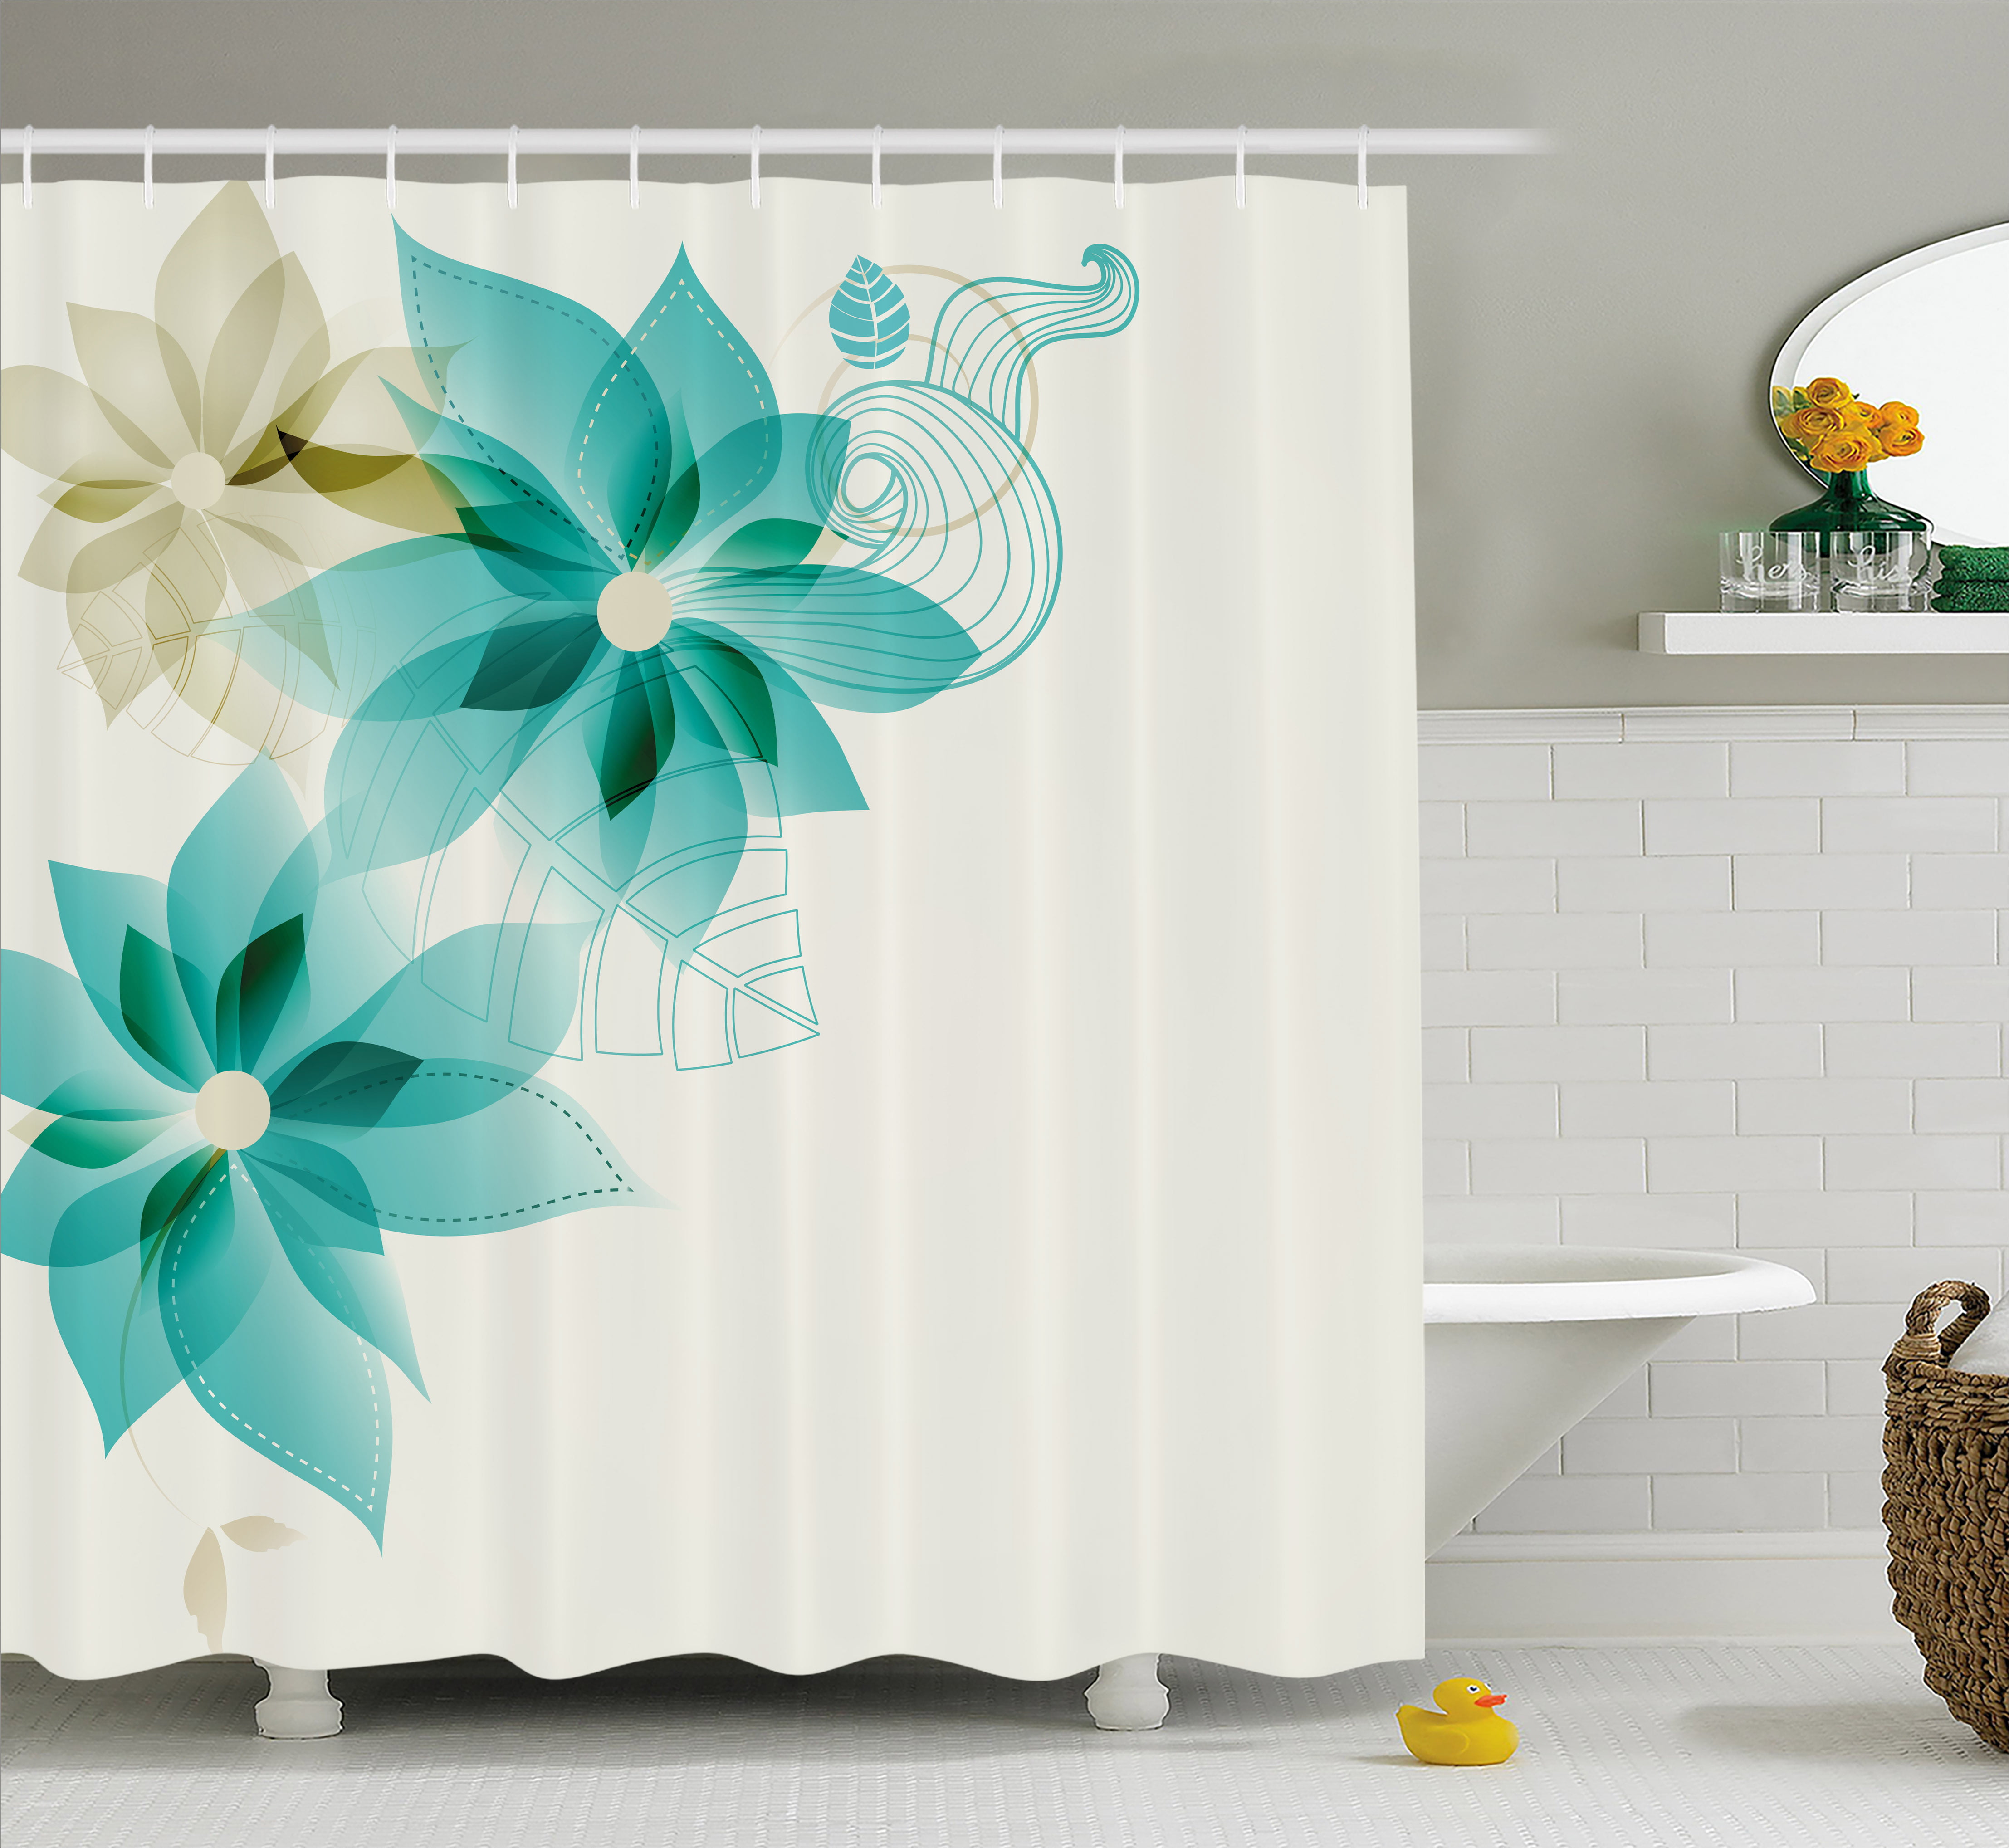 Teal Shower Curtain, Vintage Inspired Floral Design with Abstract ...